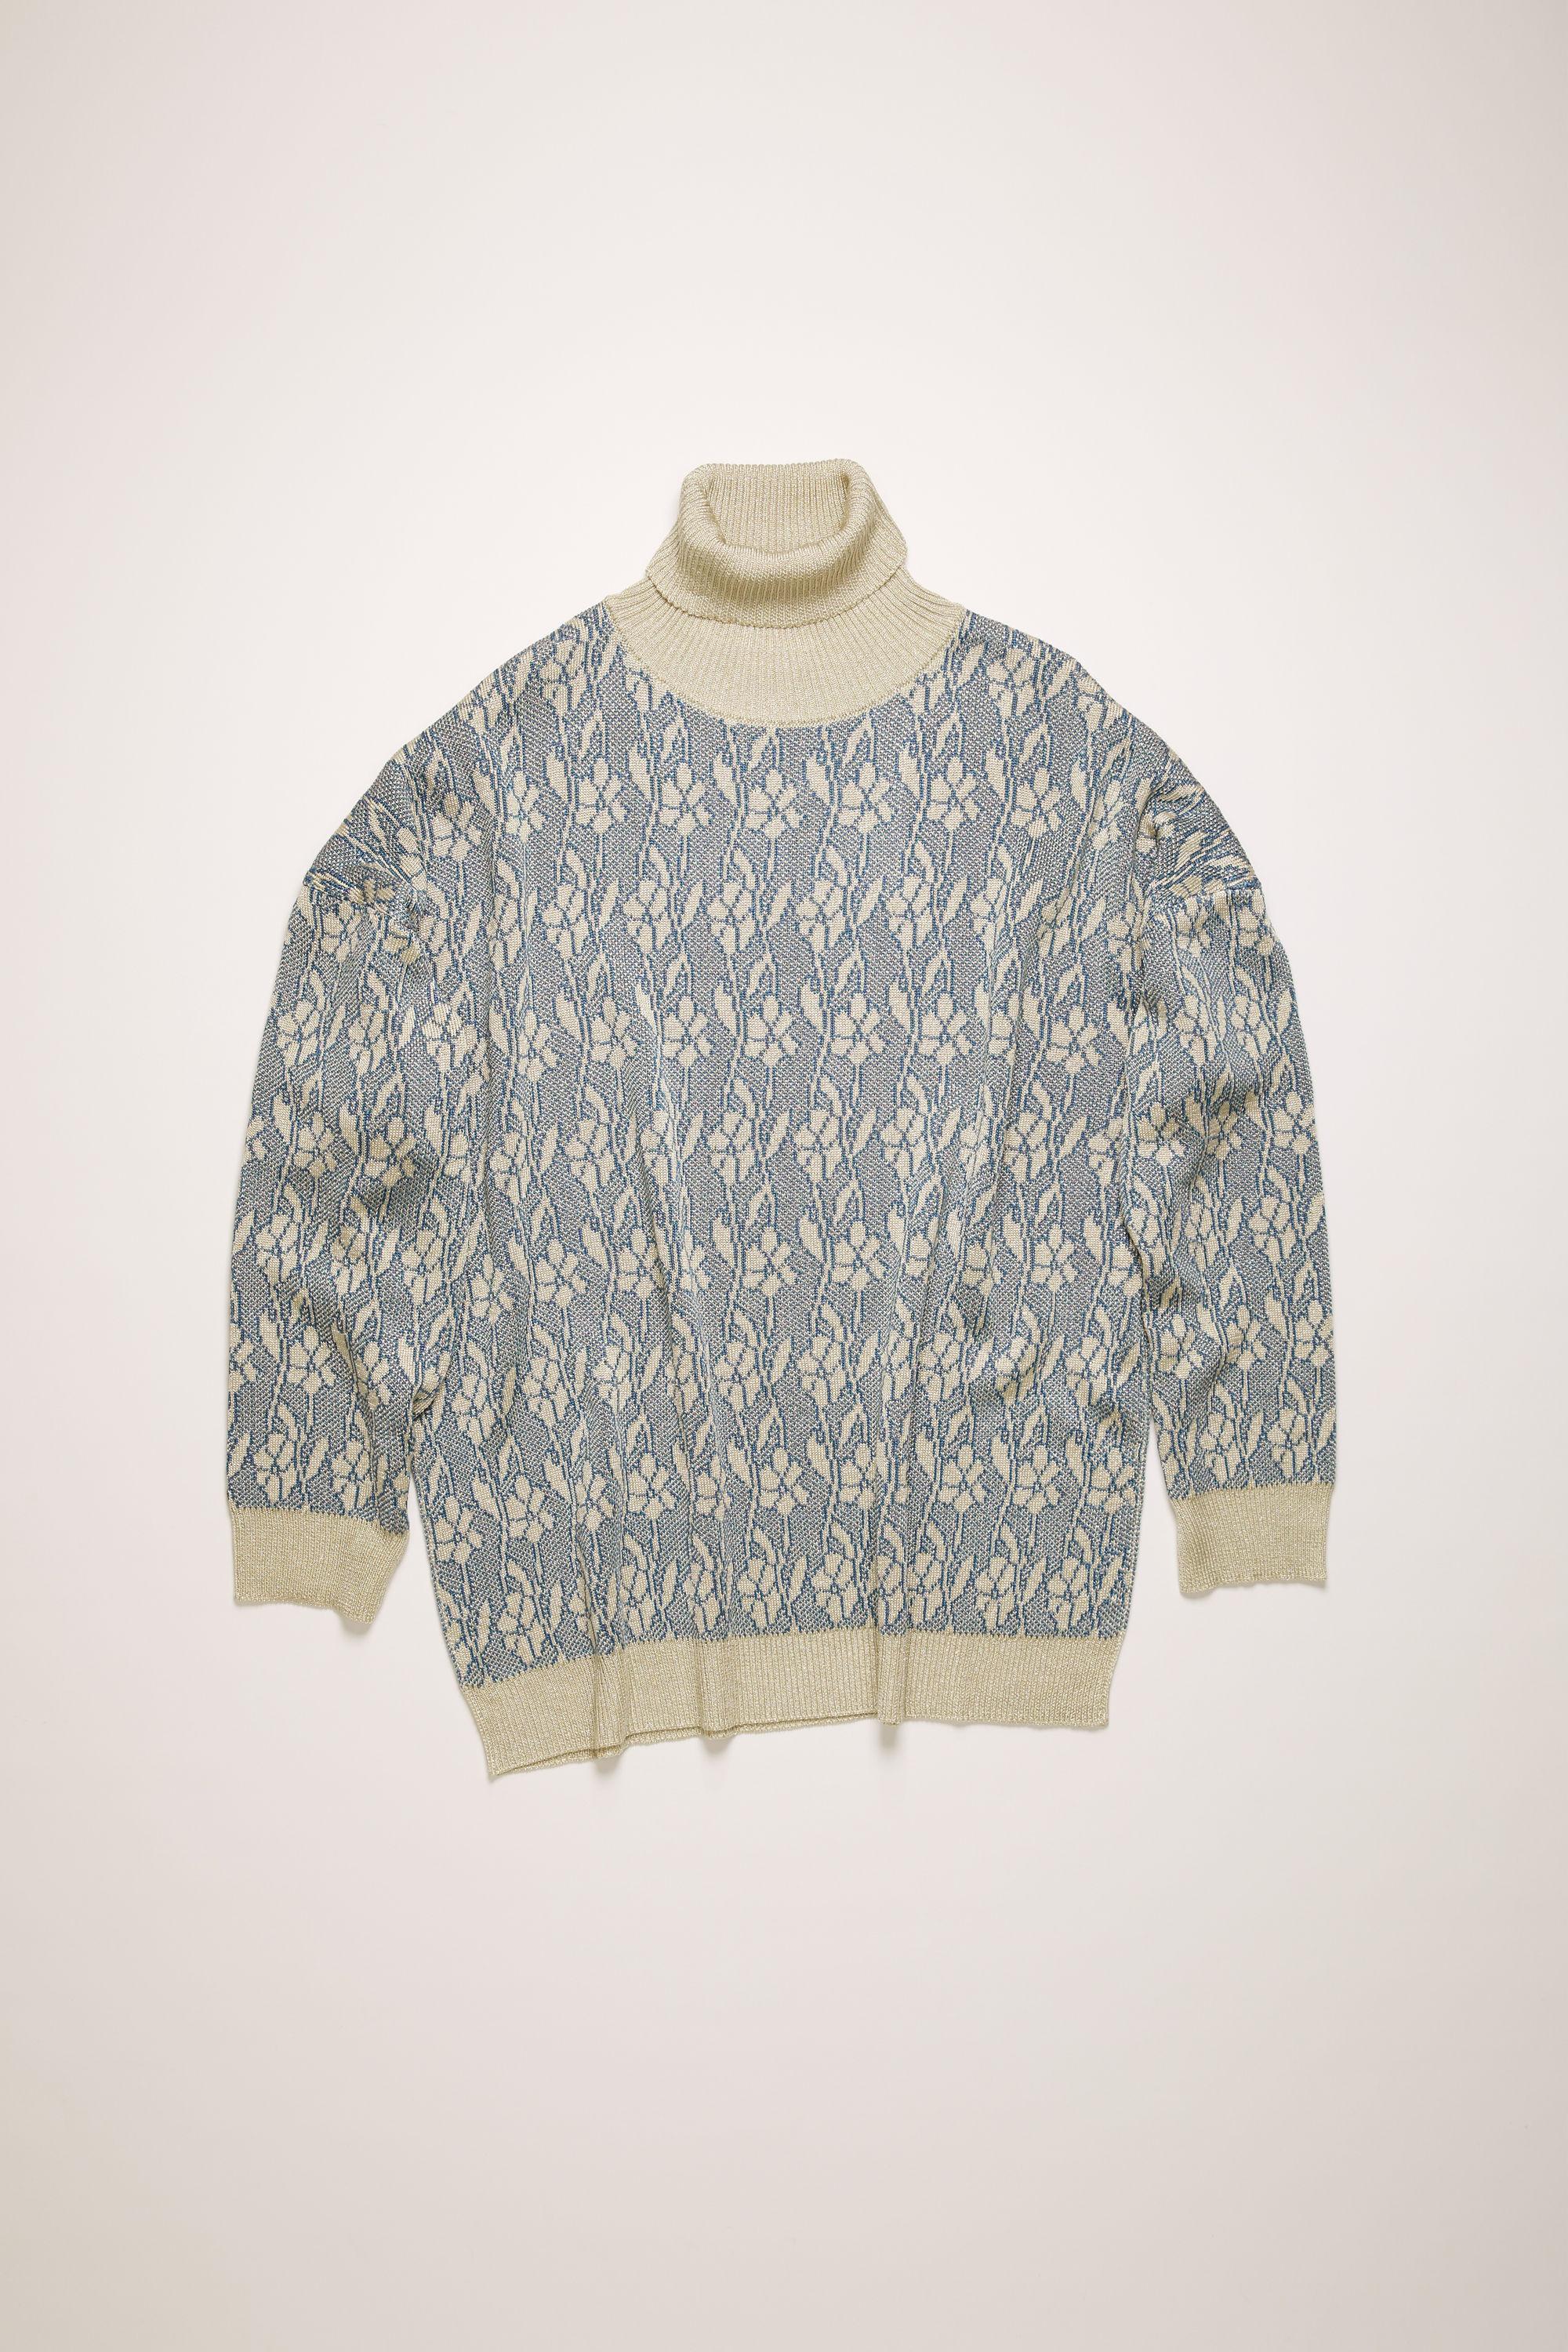 Acne Studios Synthetic Flower Jacquard Sweater silver in Metallic - Lyst